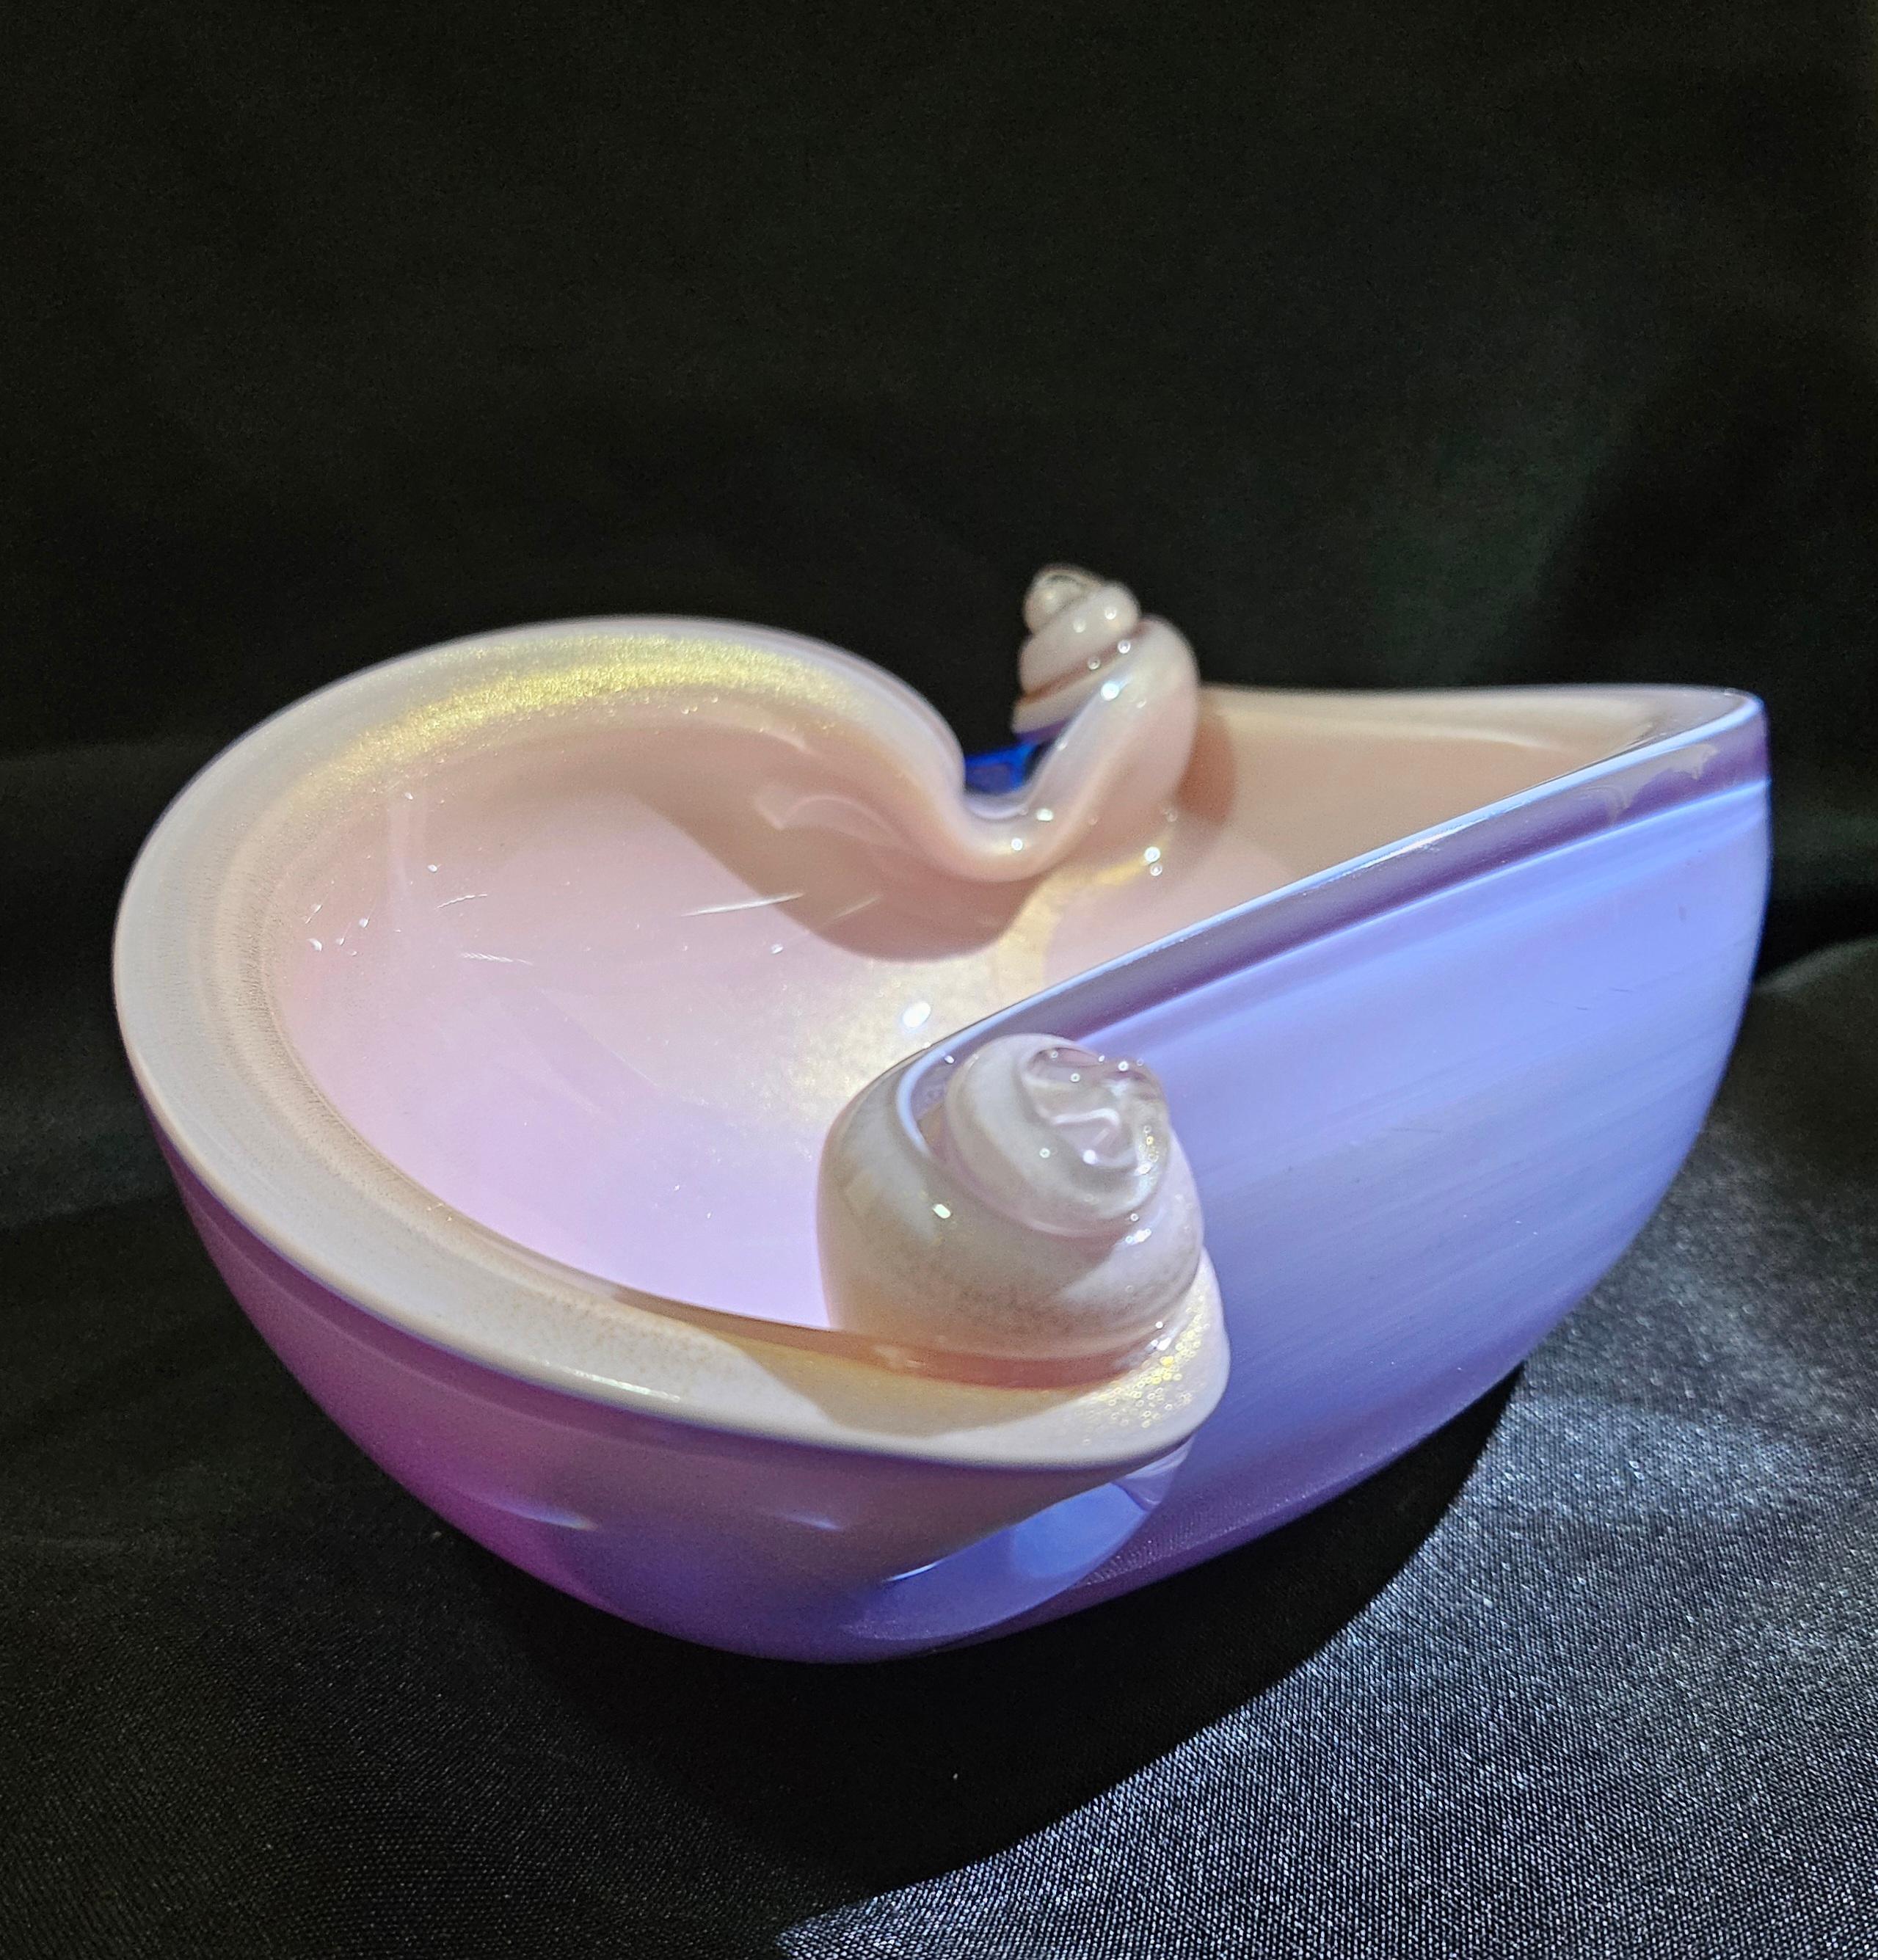 Alfredo Barbini Murano Glass Shell Bowl, Lilac & Pink with Gold Polveri
May function as an ashtray, bowl, trinket dish, or similar vessel, or as a unique art piece for display.
Colors: Lilac exterior, Pink interior with gold polveri
Type: Hand blown